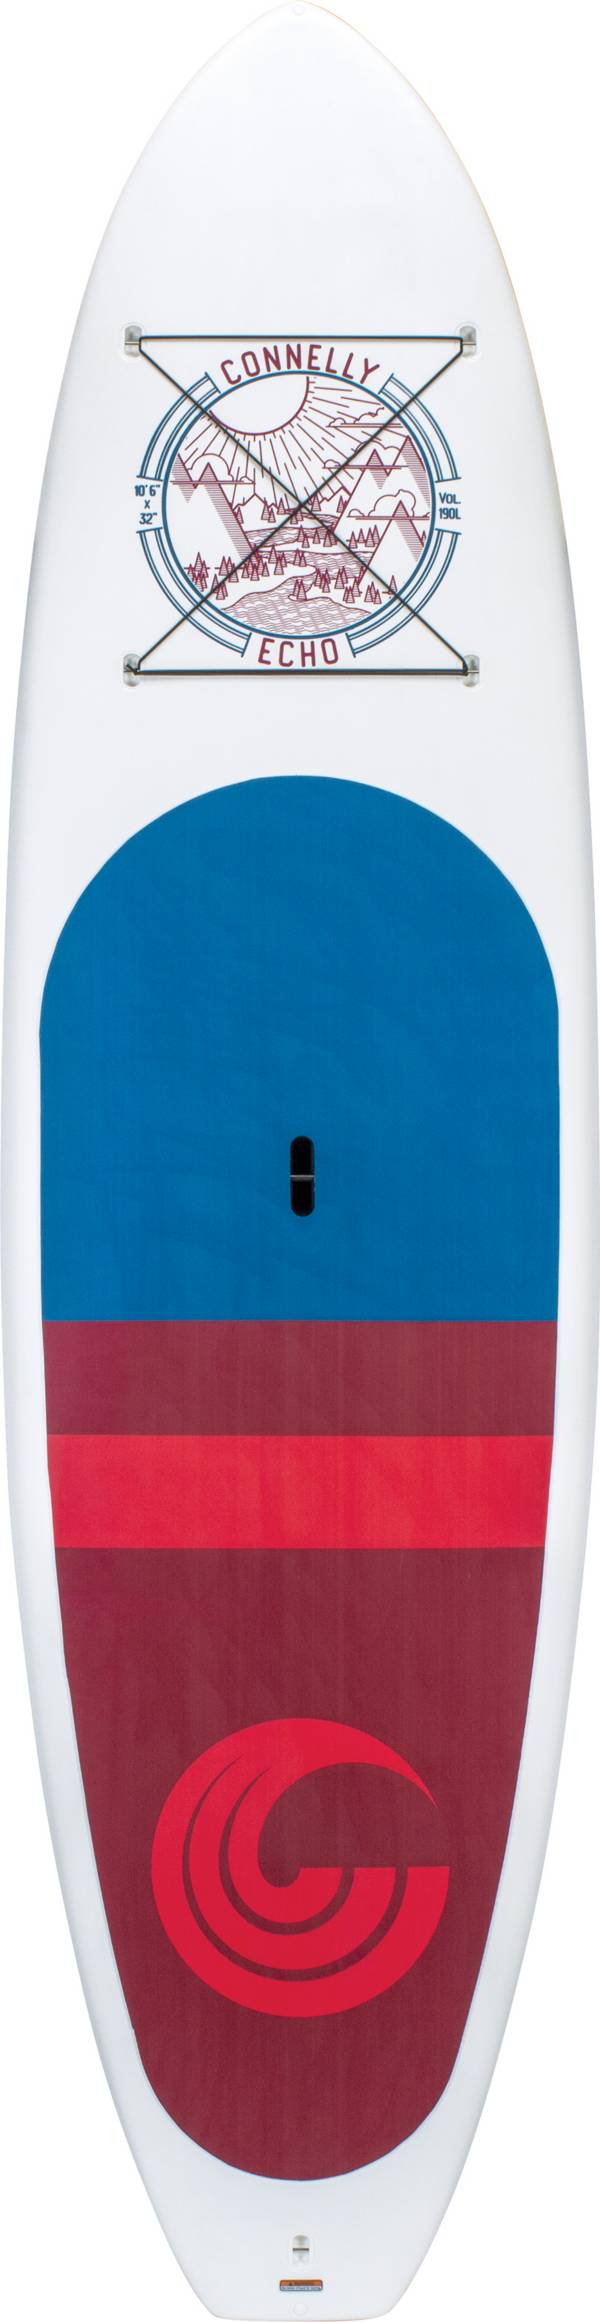 Connelly Echo 10'6" Stand-Up Paddle Board with Paddle product image